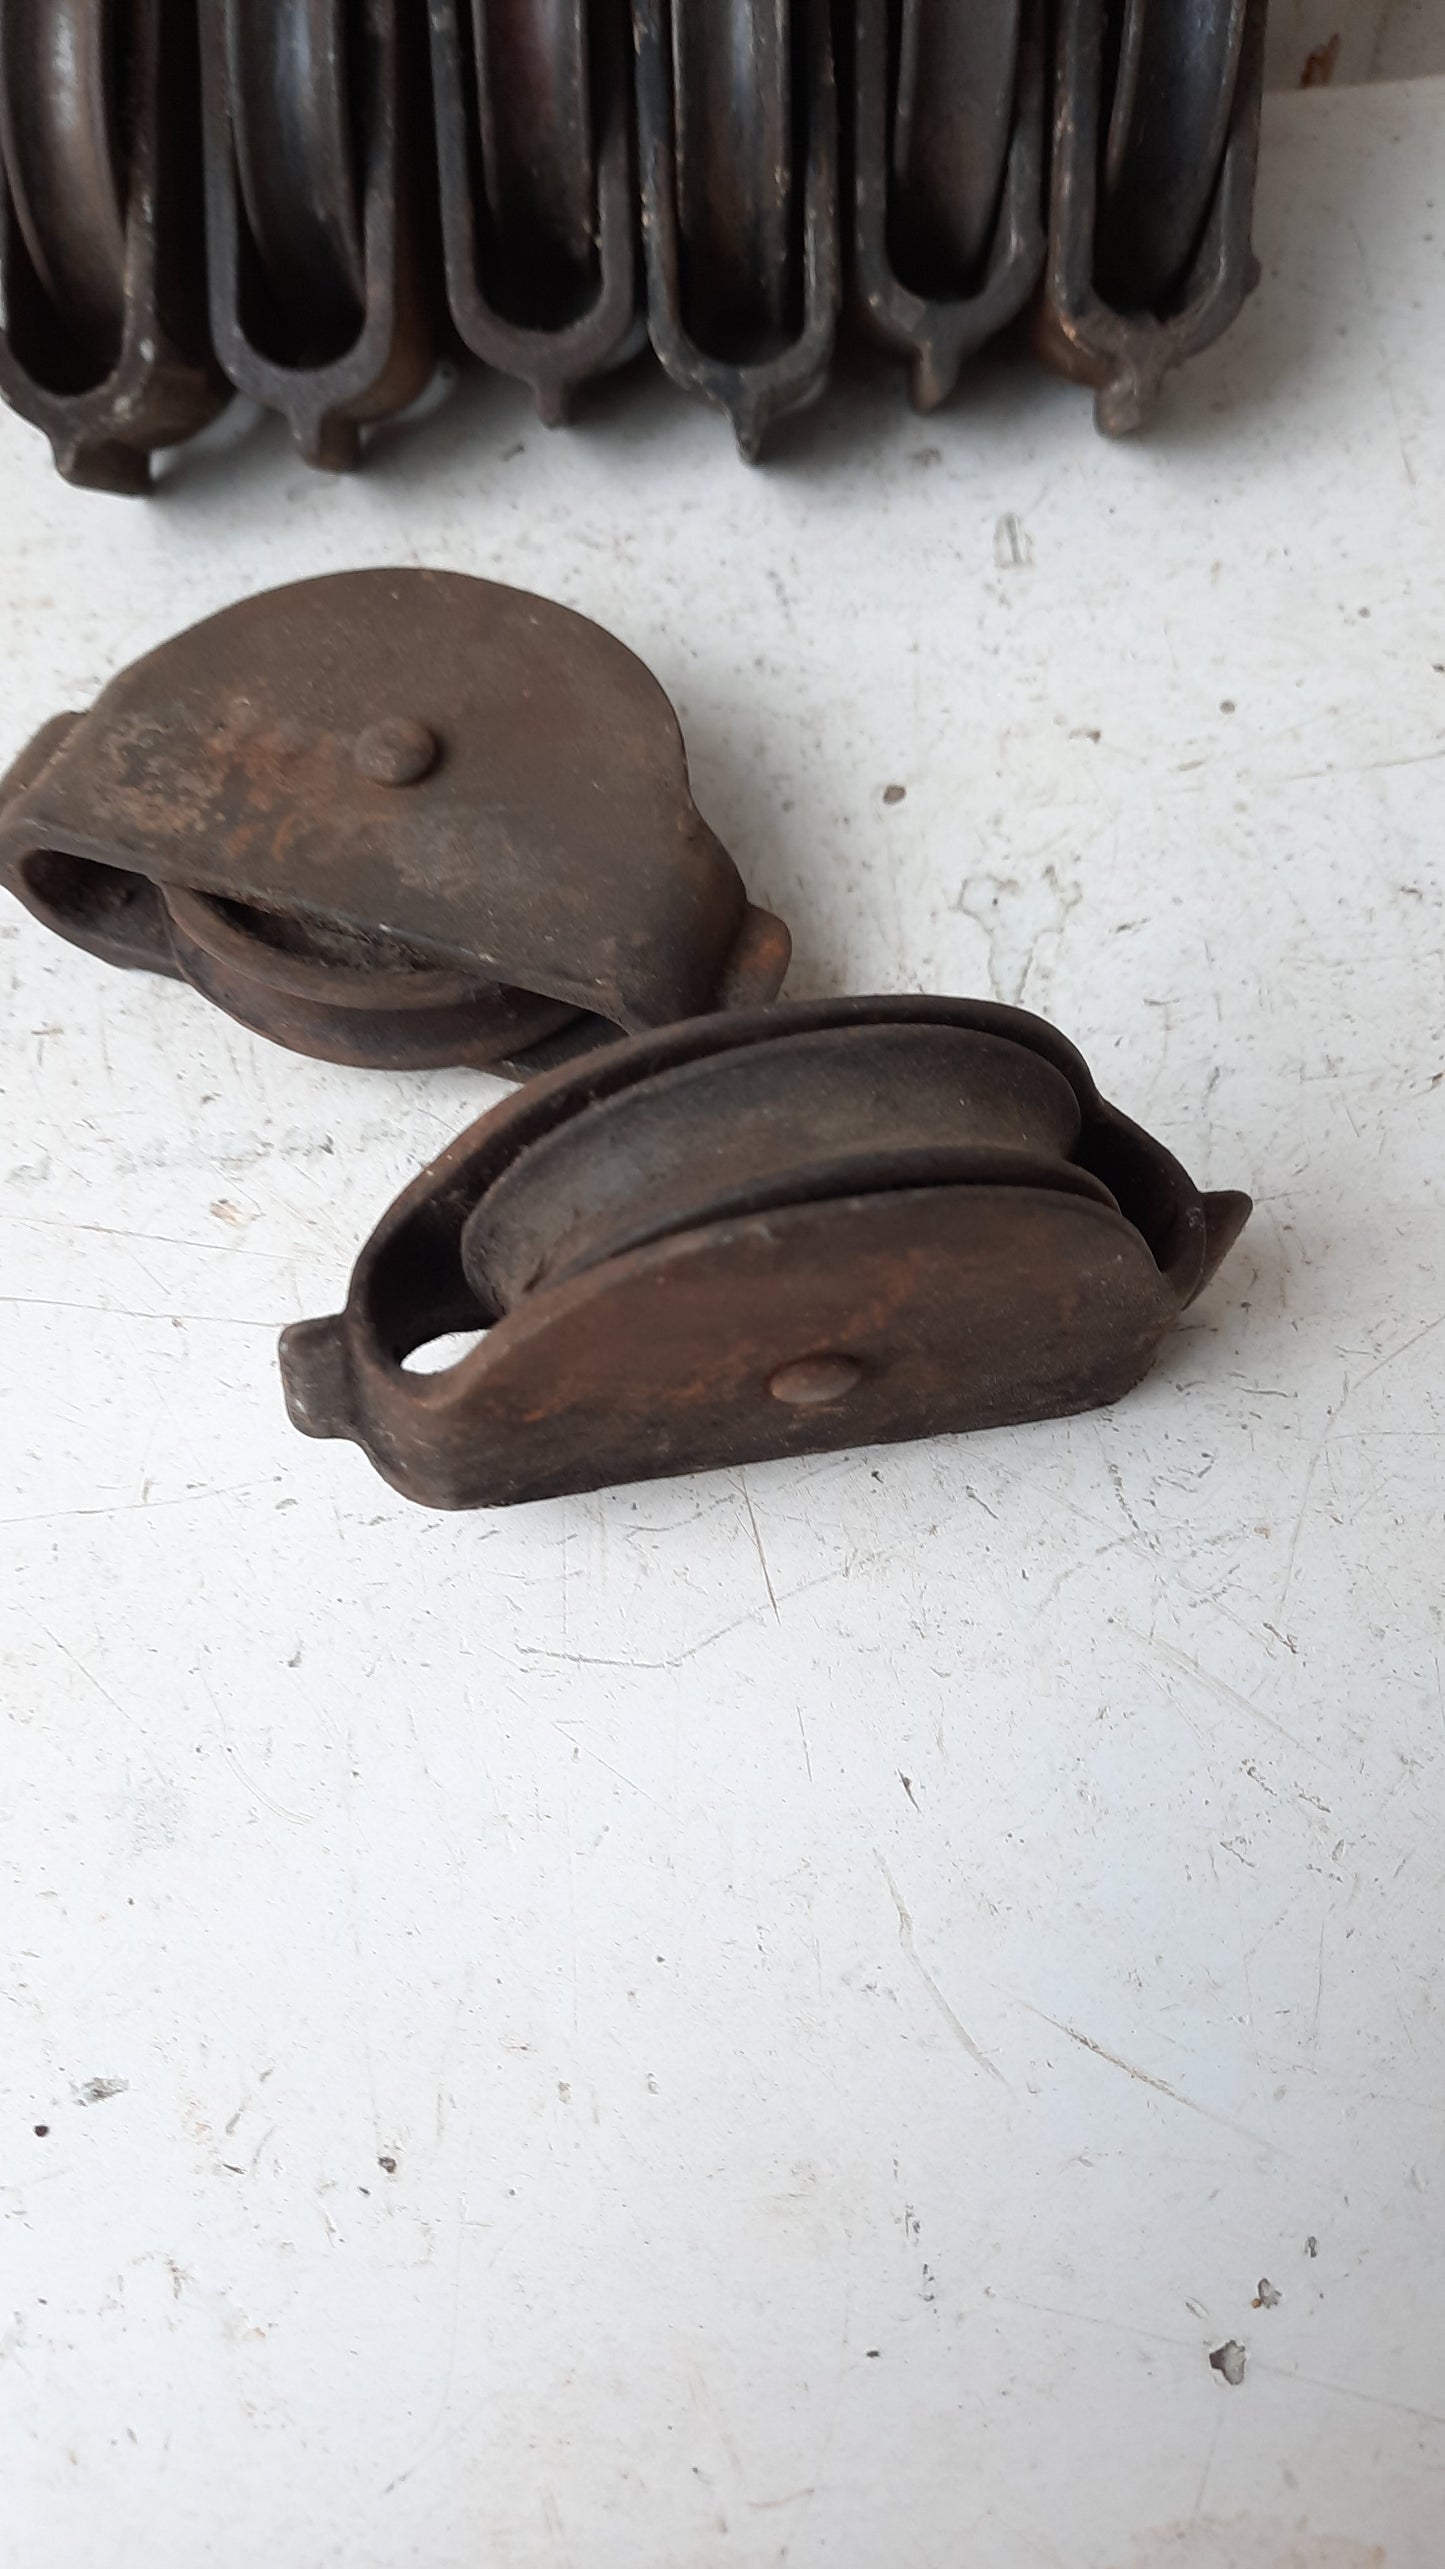 Set of Antique Iron Sash Pulleys, Wooden Window Pulley Wheels for Weights